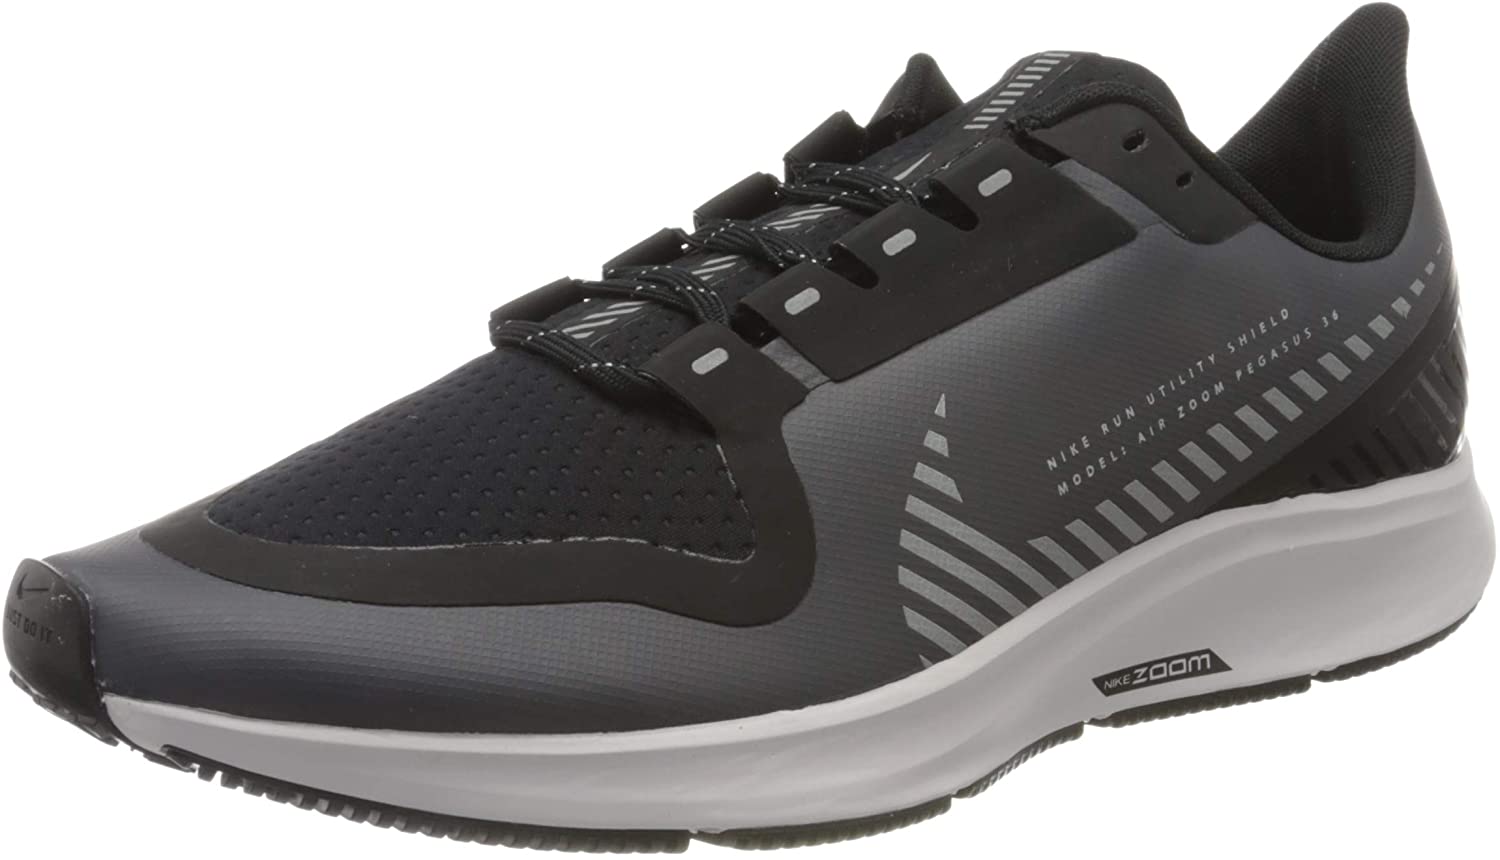 Nike Mens Competition Running Shoes - image 1 of 7